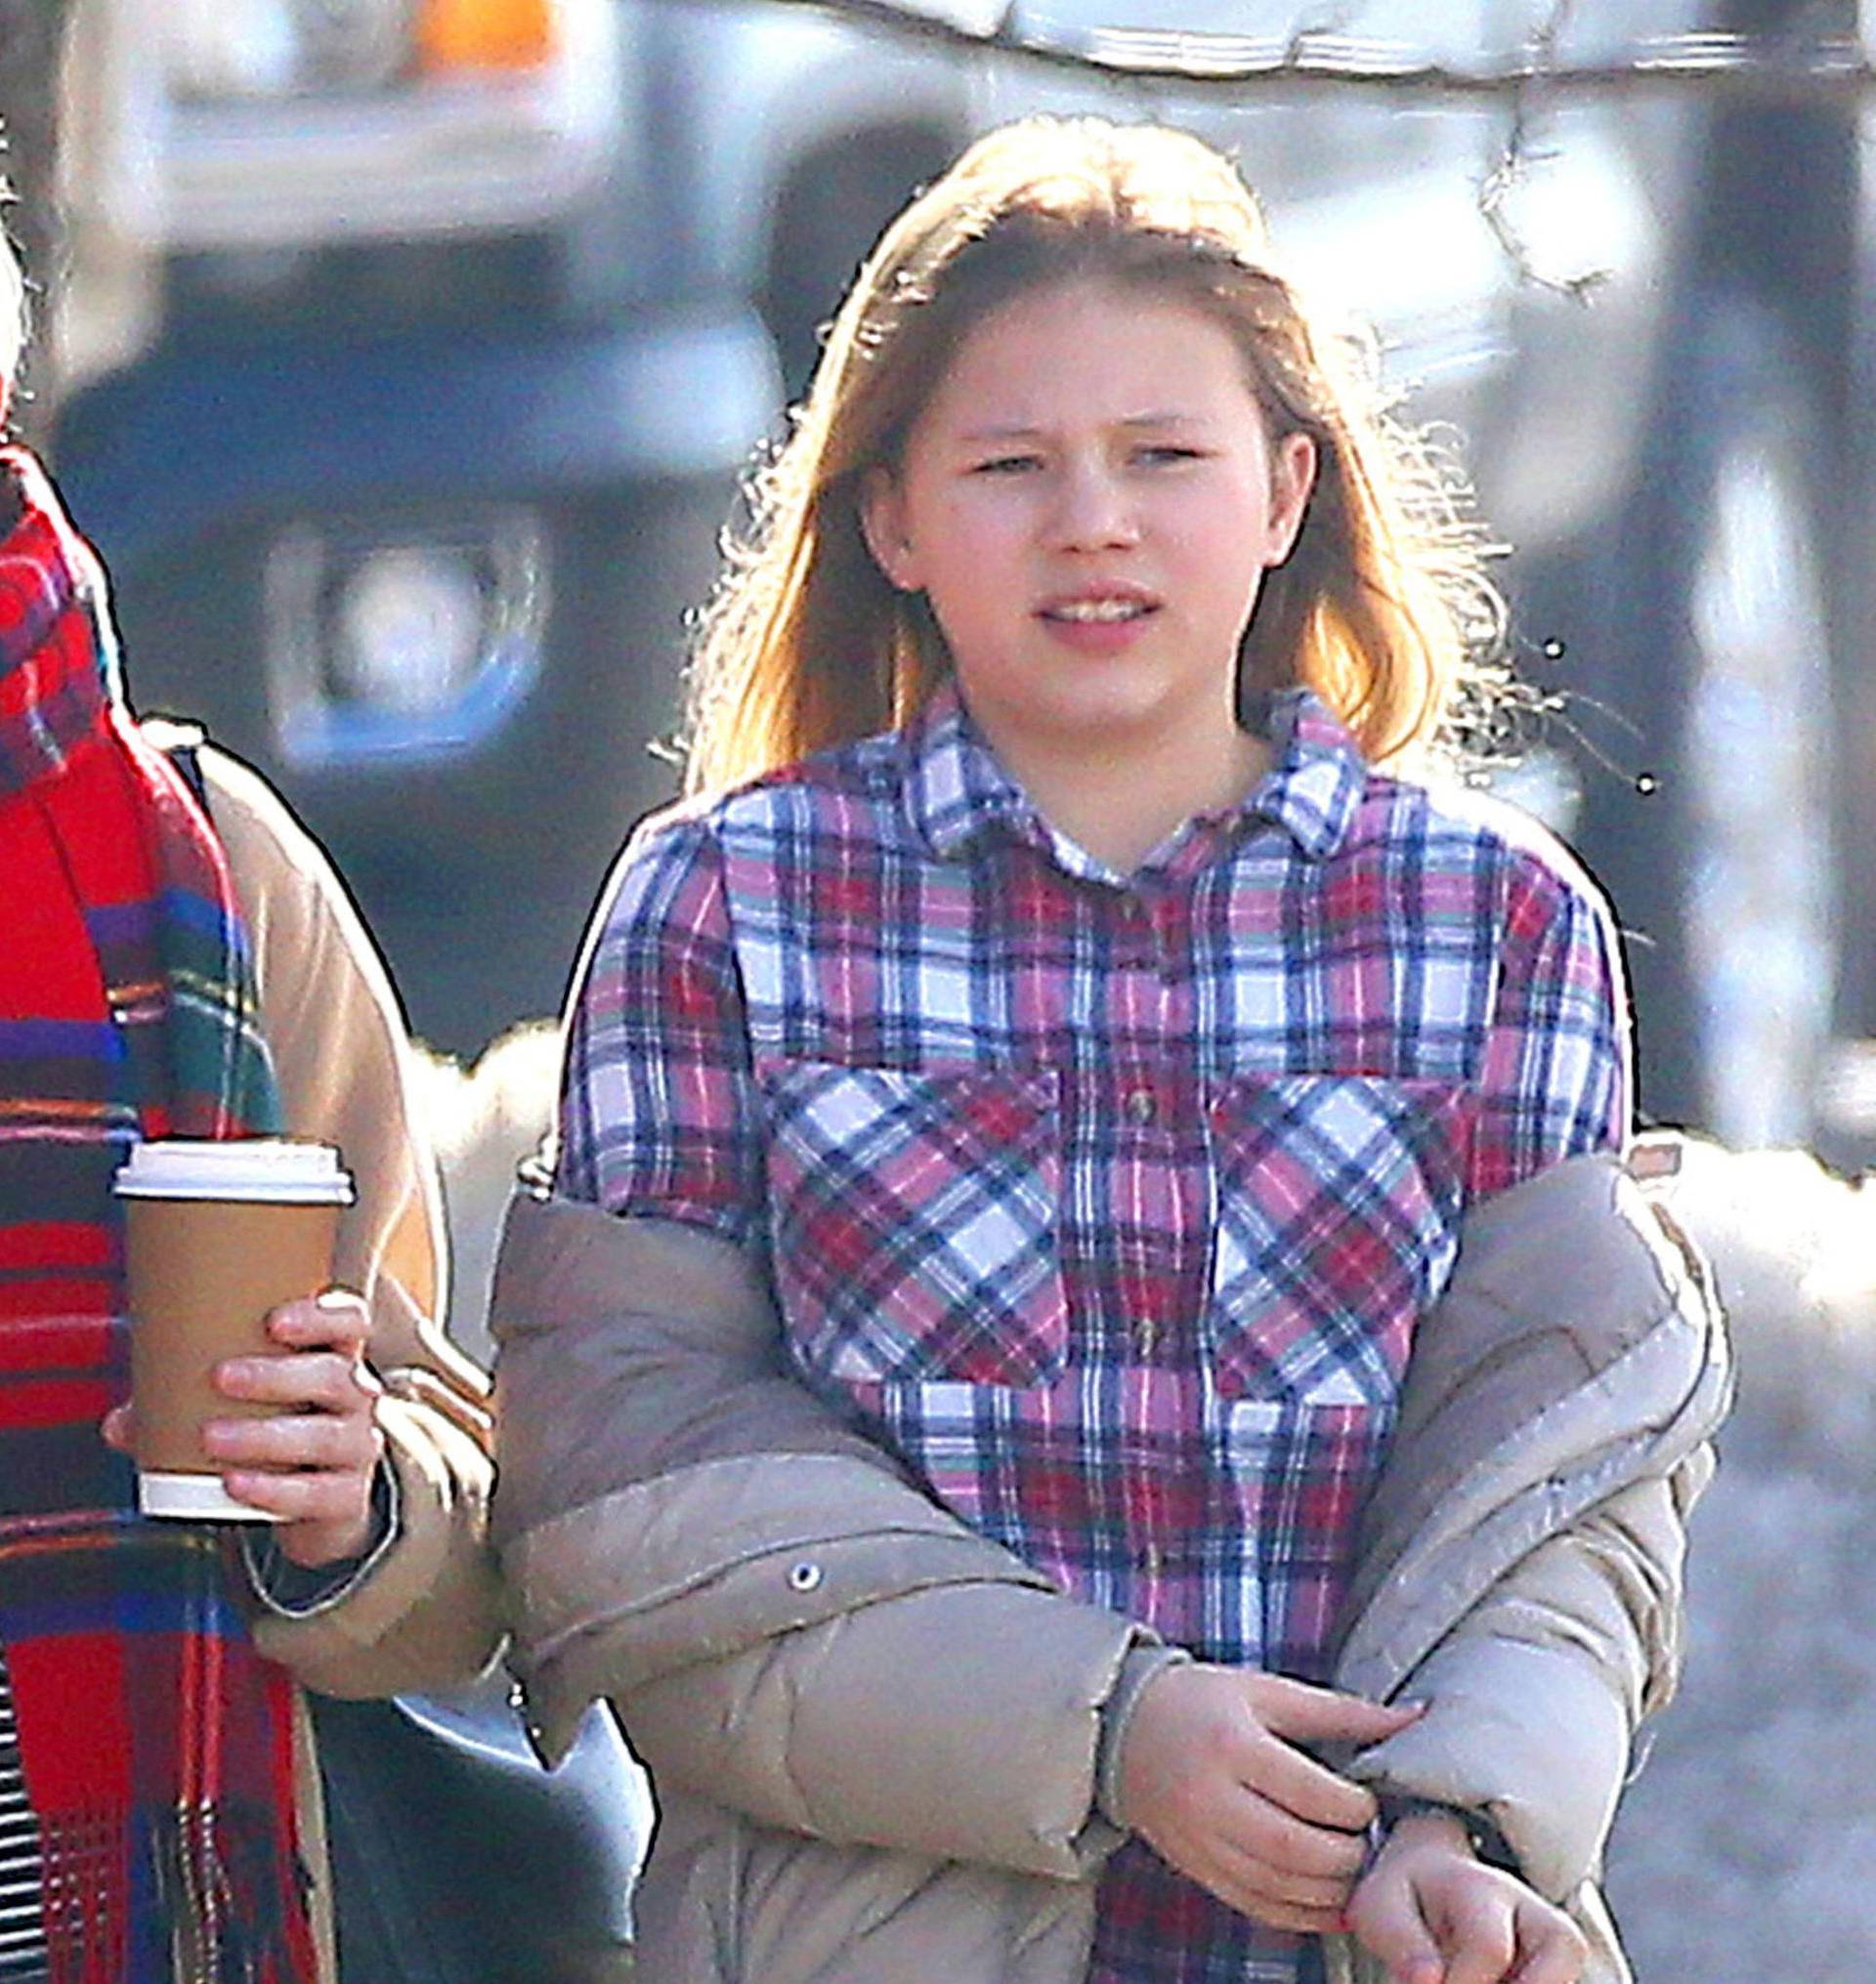 *EXCLUSIVE* Michelle Williams and her daughter Matilda step out in snowy Brooklyn